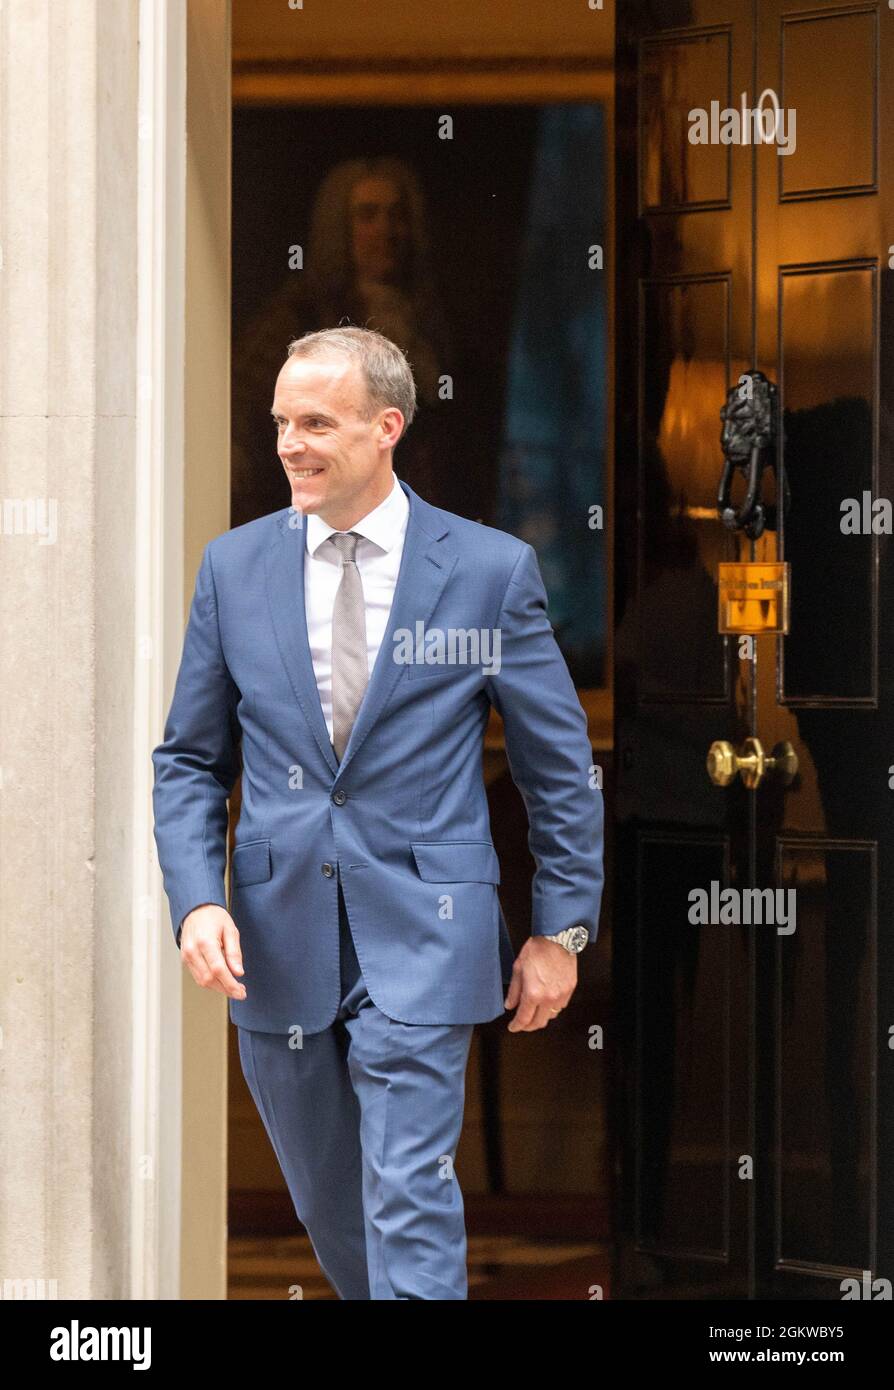 London, UK. 15th Sep, 2021. Cabinet reshuffled Downing Street London Dominic Raab, former Foreign Secretary now Justice Secretary and deputy prime minister Credit: Ian Davidson/Alamy Live News Stock Photo